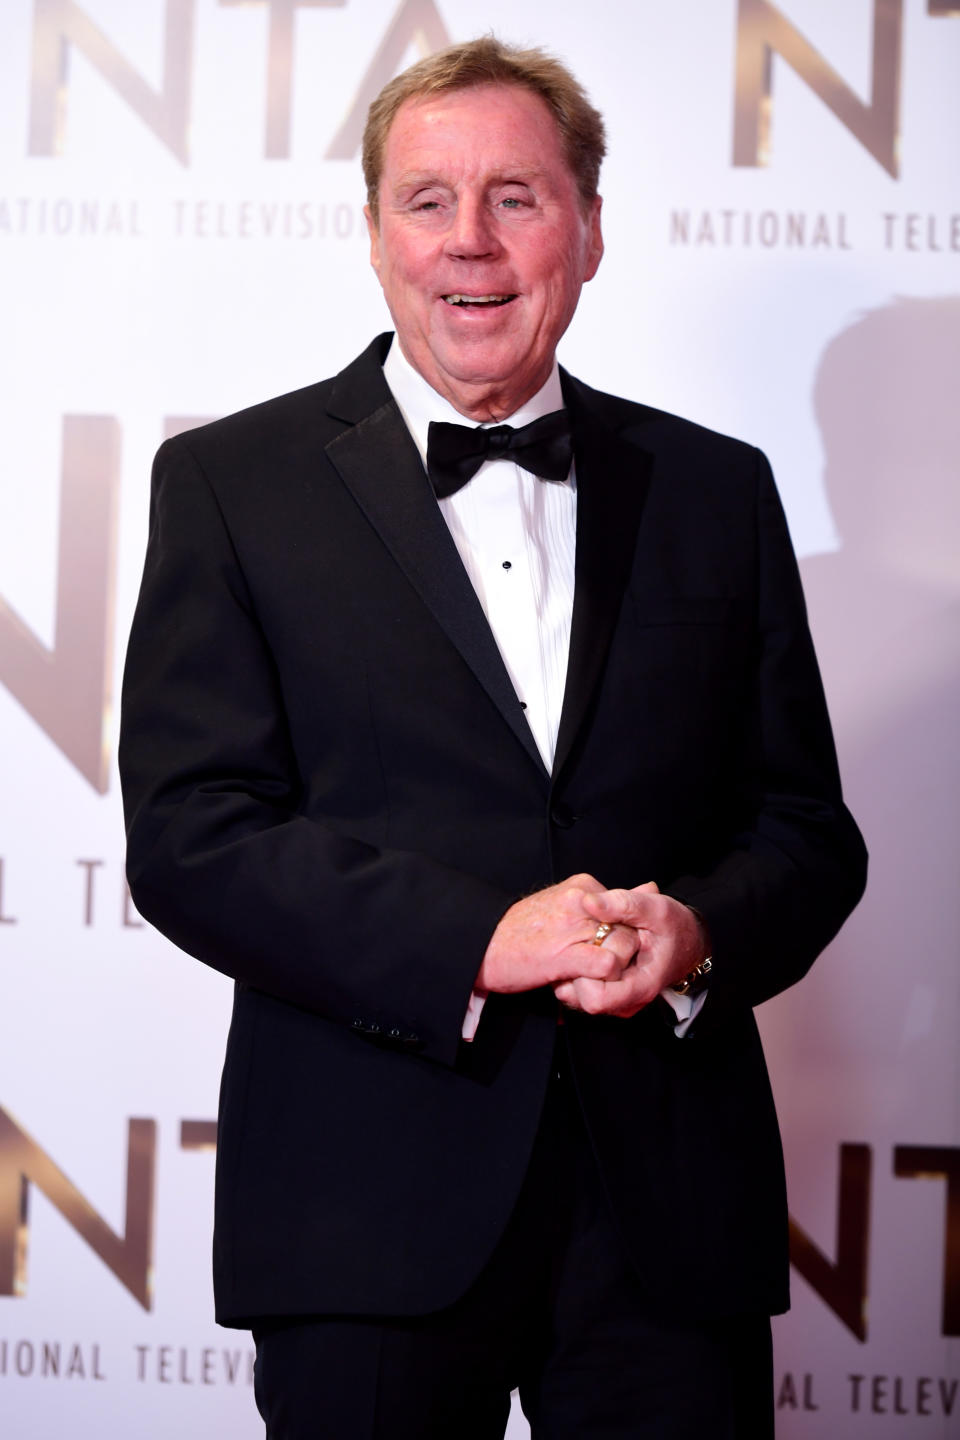 Harry Redknapp in the Press Room at the National Television Awards 2019 held at the O2 Arena, London.